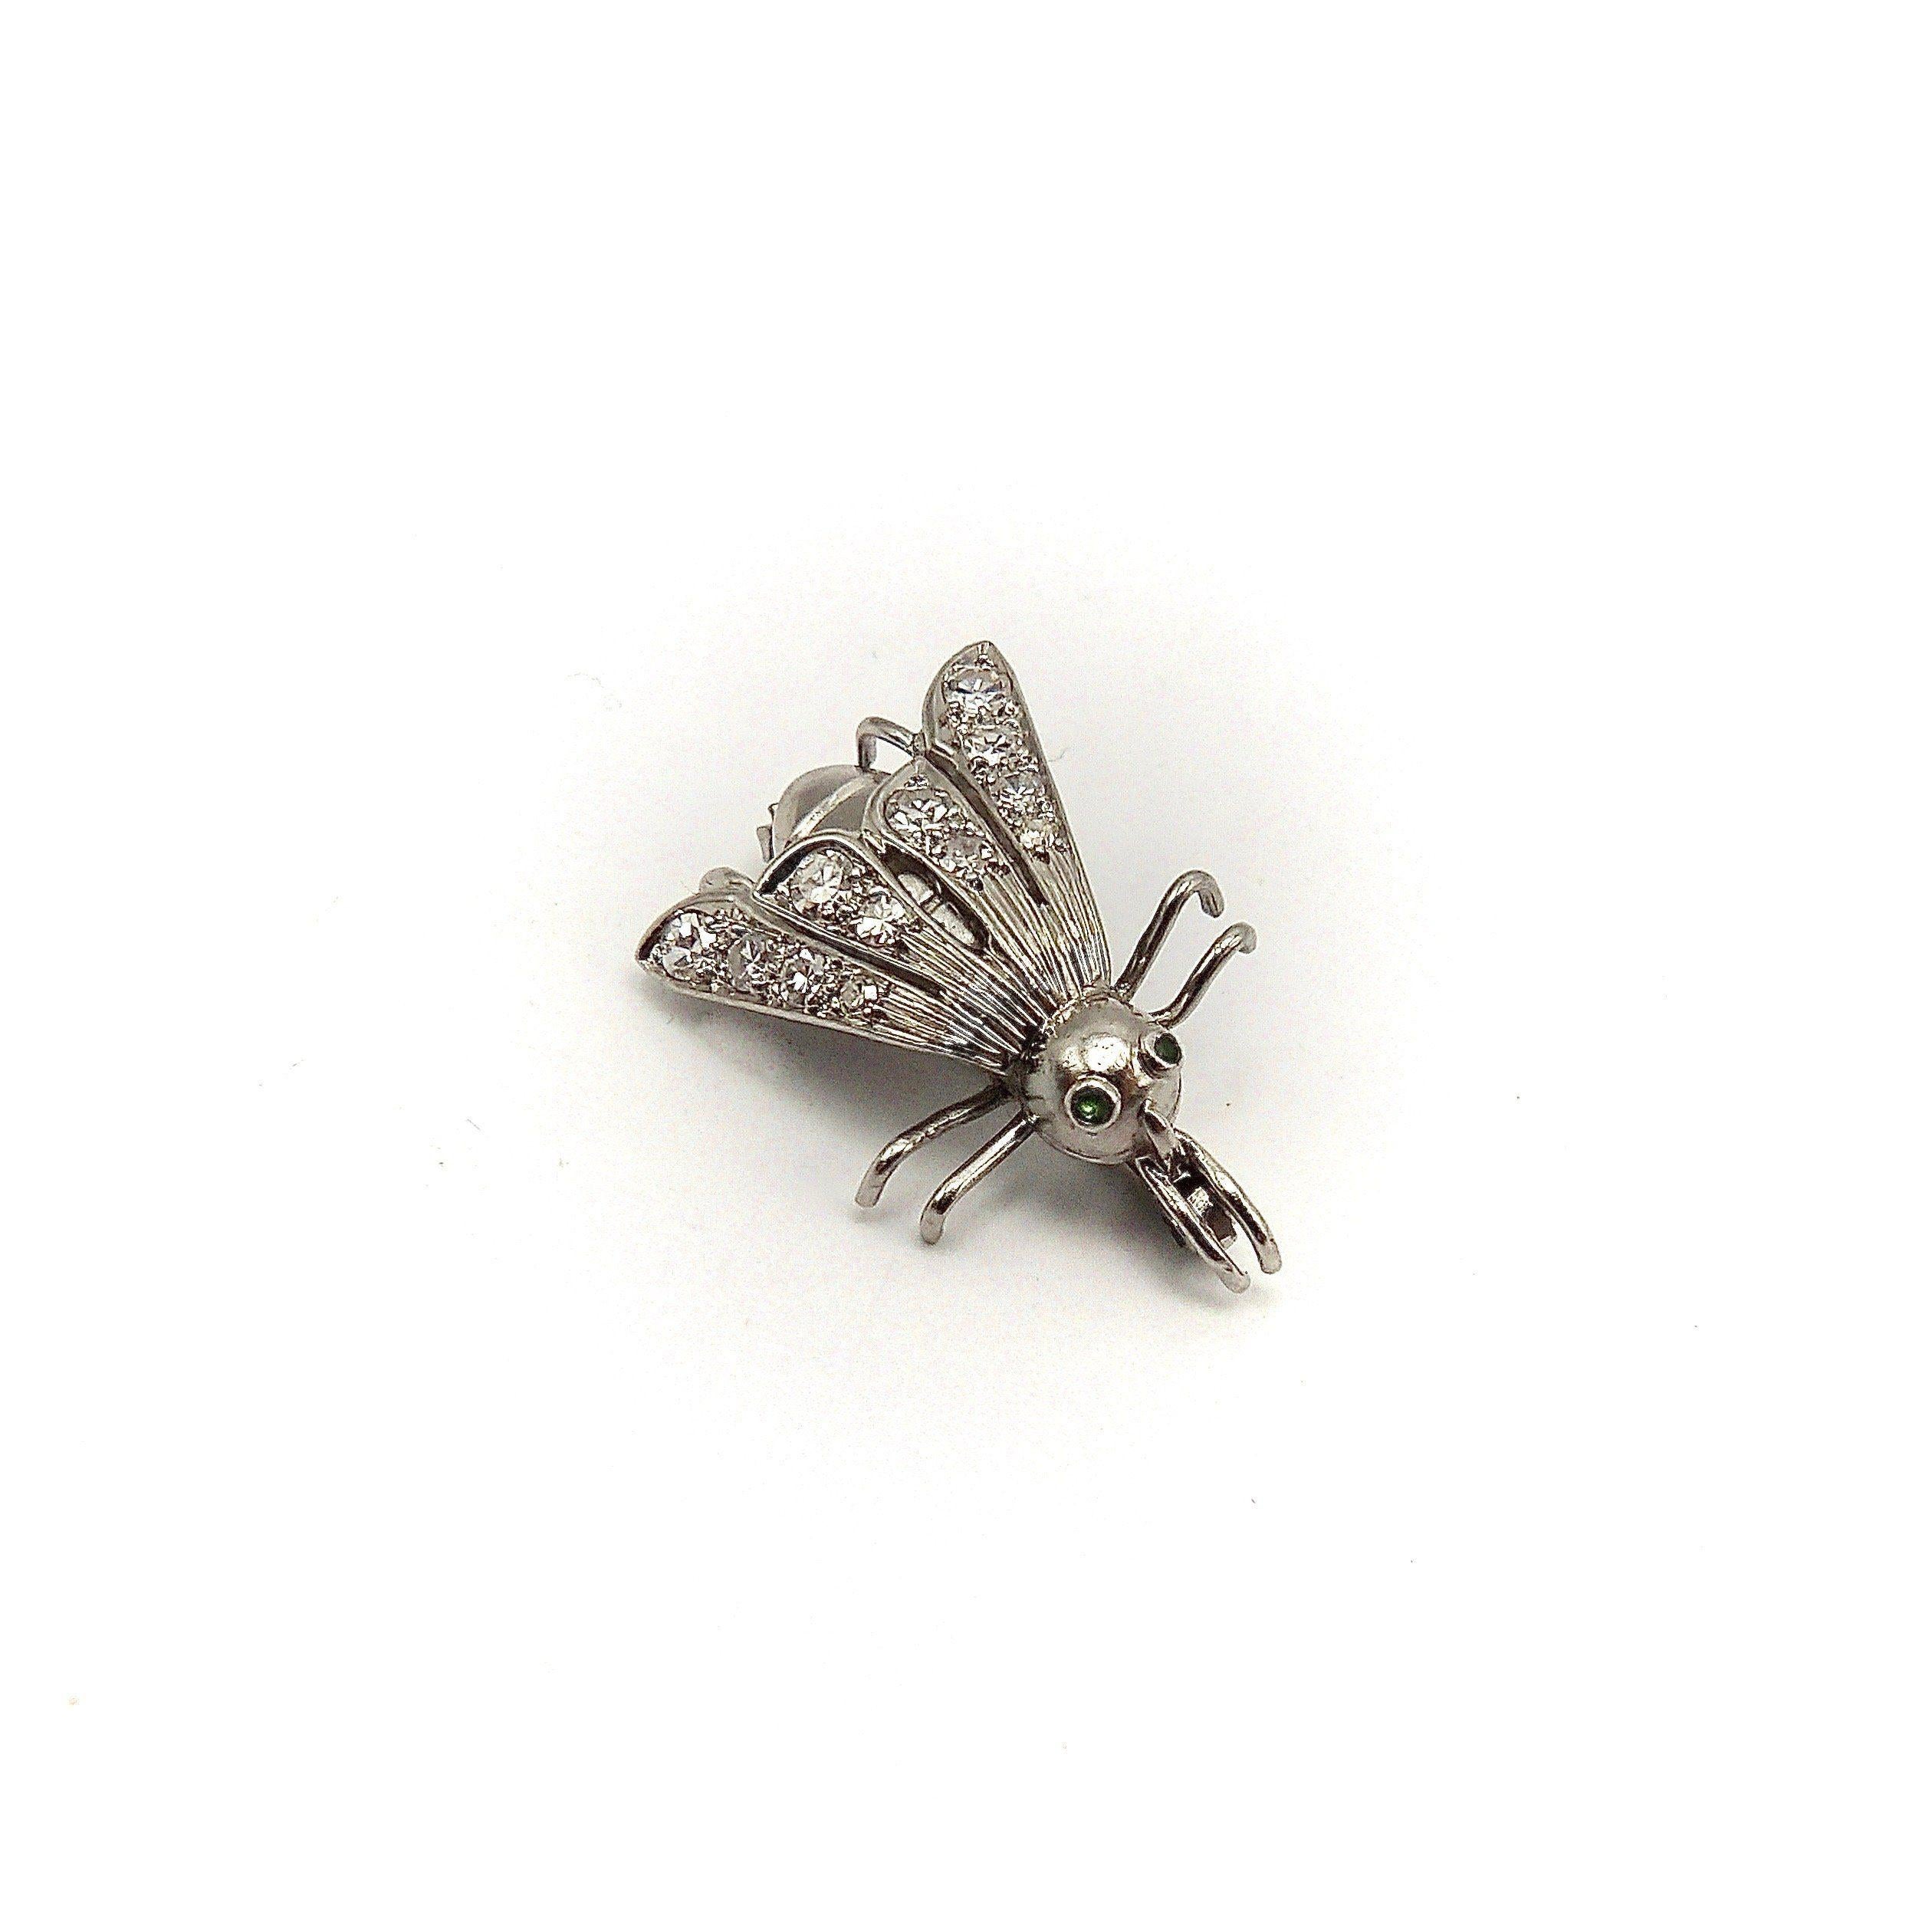 This is an impeccably crafted platinum fly pin from the Art Deco Era. You won’t want to swat this diamond and emerald encrusted fly pin away! The details to admire are many. The platinum body has six tiny legs and the wings have grooves that lead to